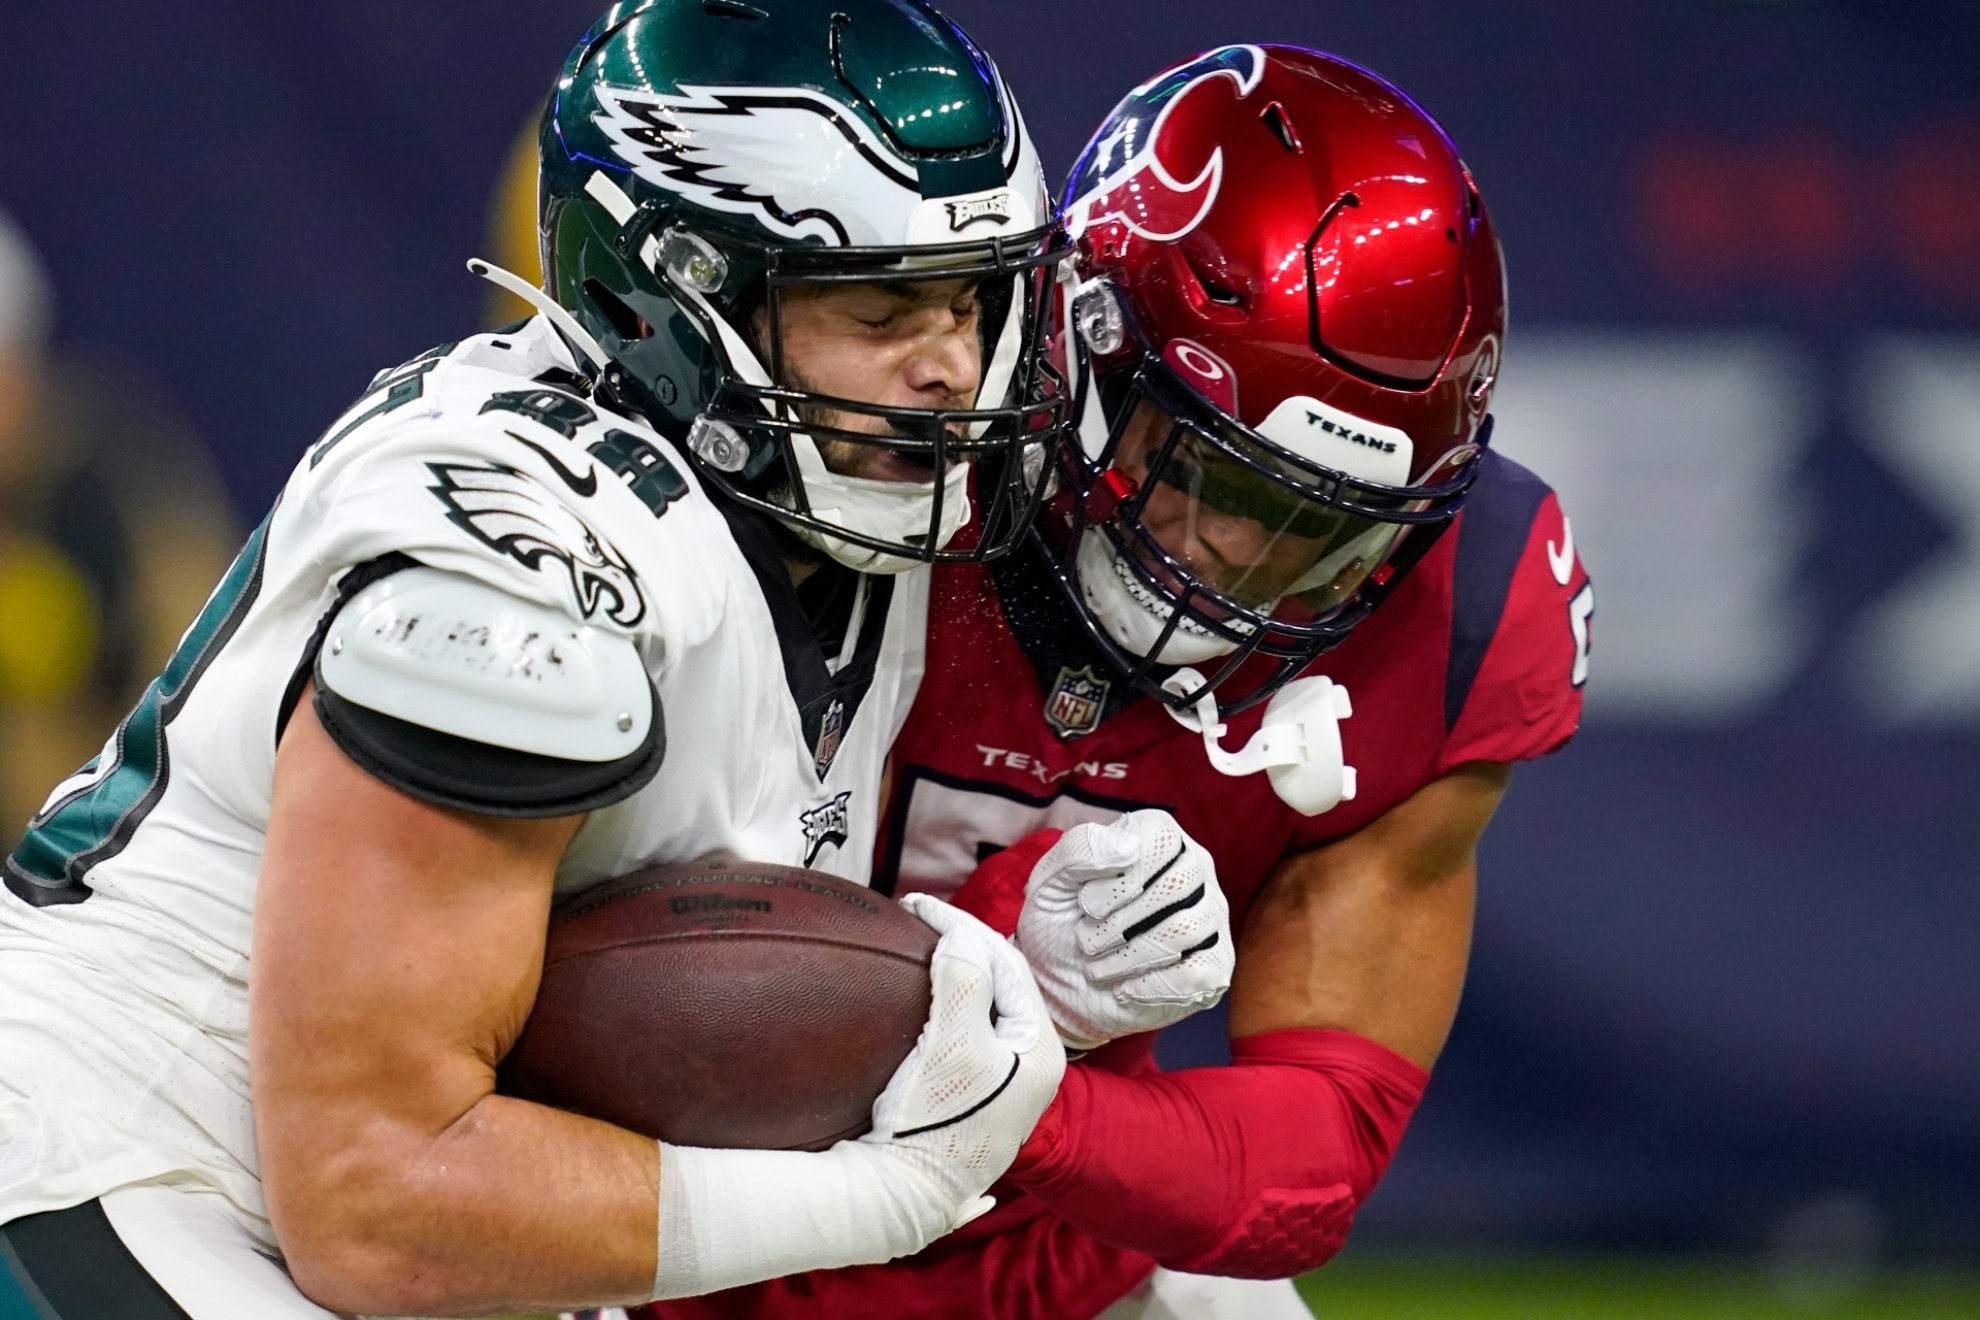 2022 NFL season: Four things to watch for in Eagles-Texans game on Prime  Video